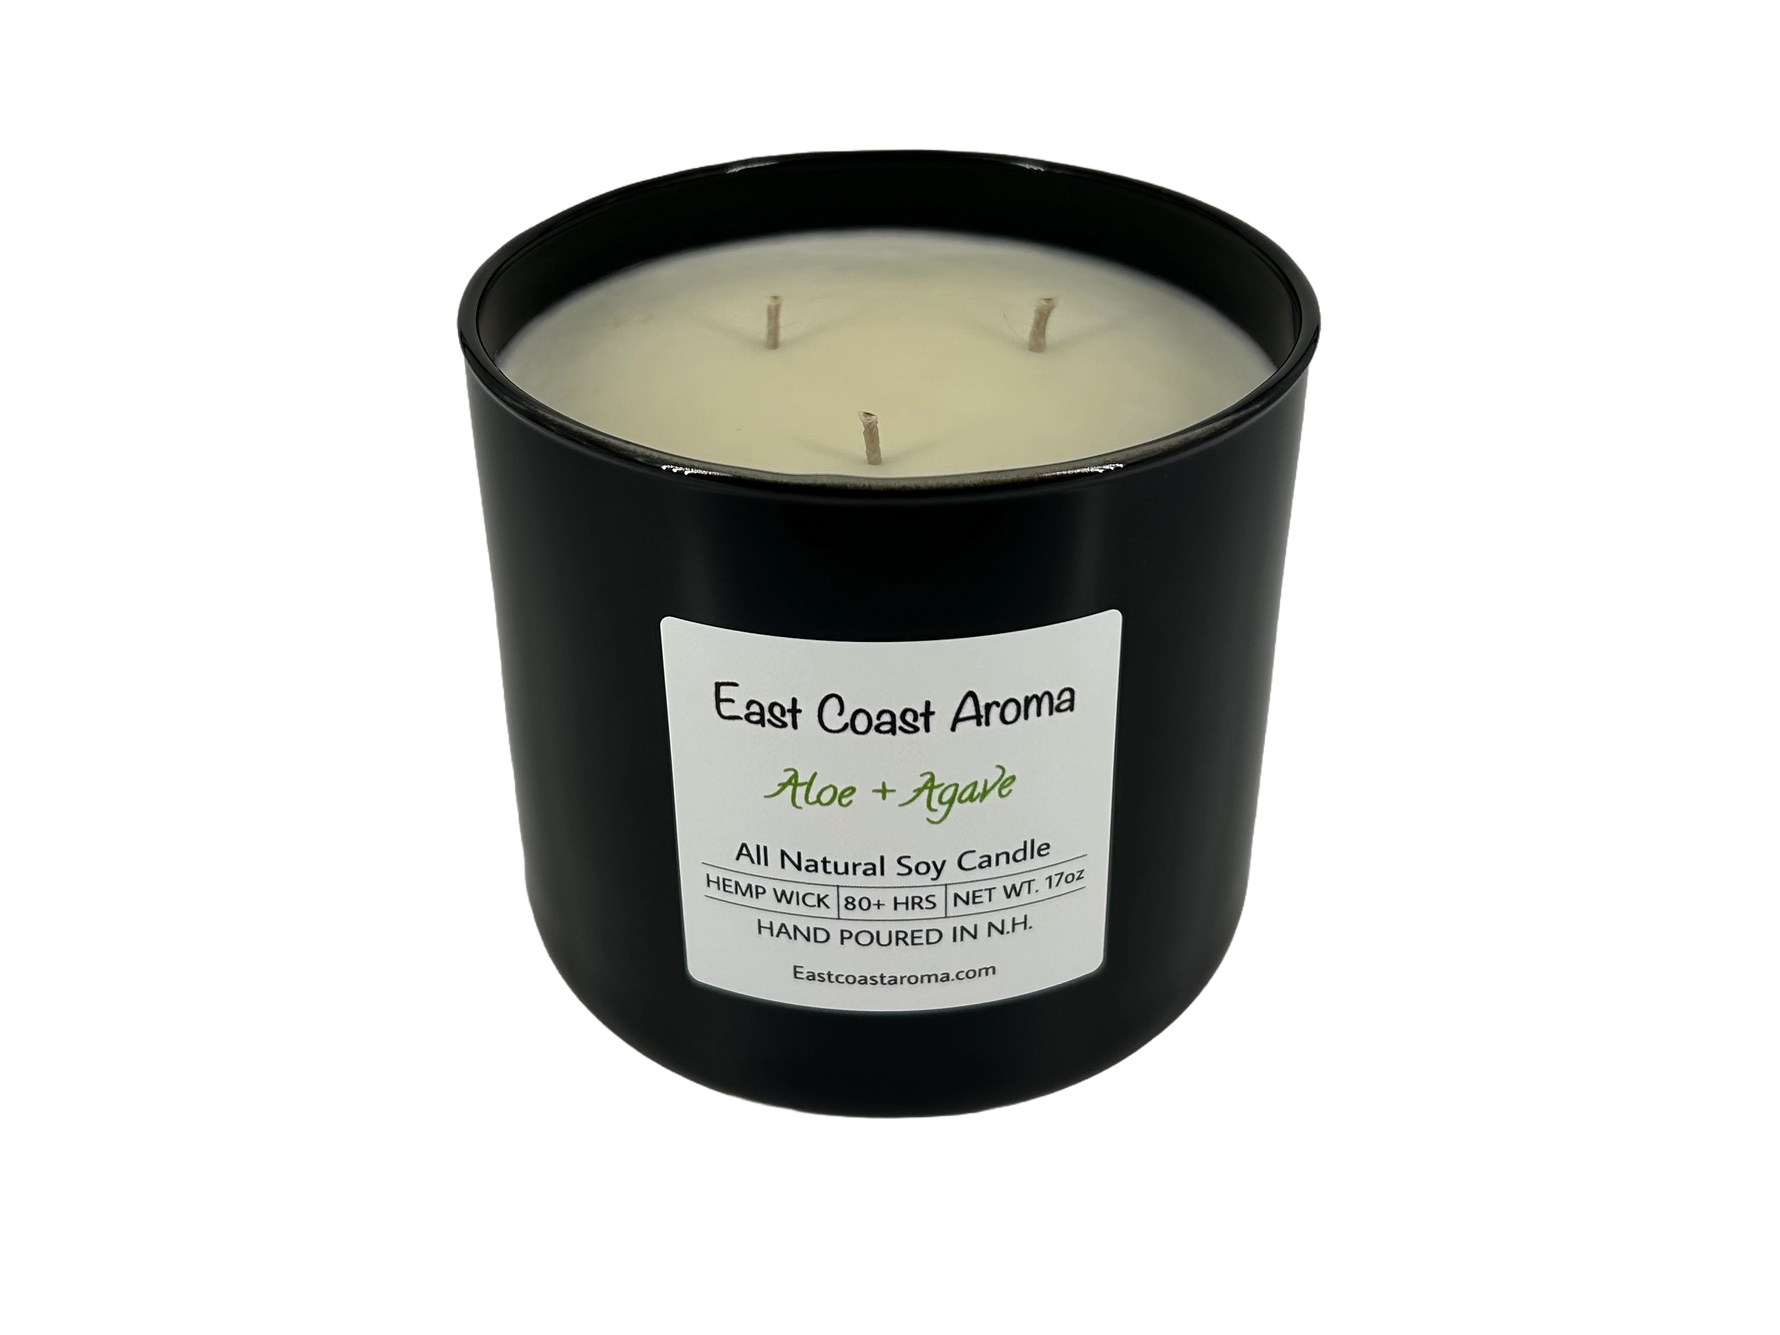 17oz Aloe and Agave Soy Candle